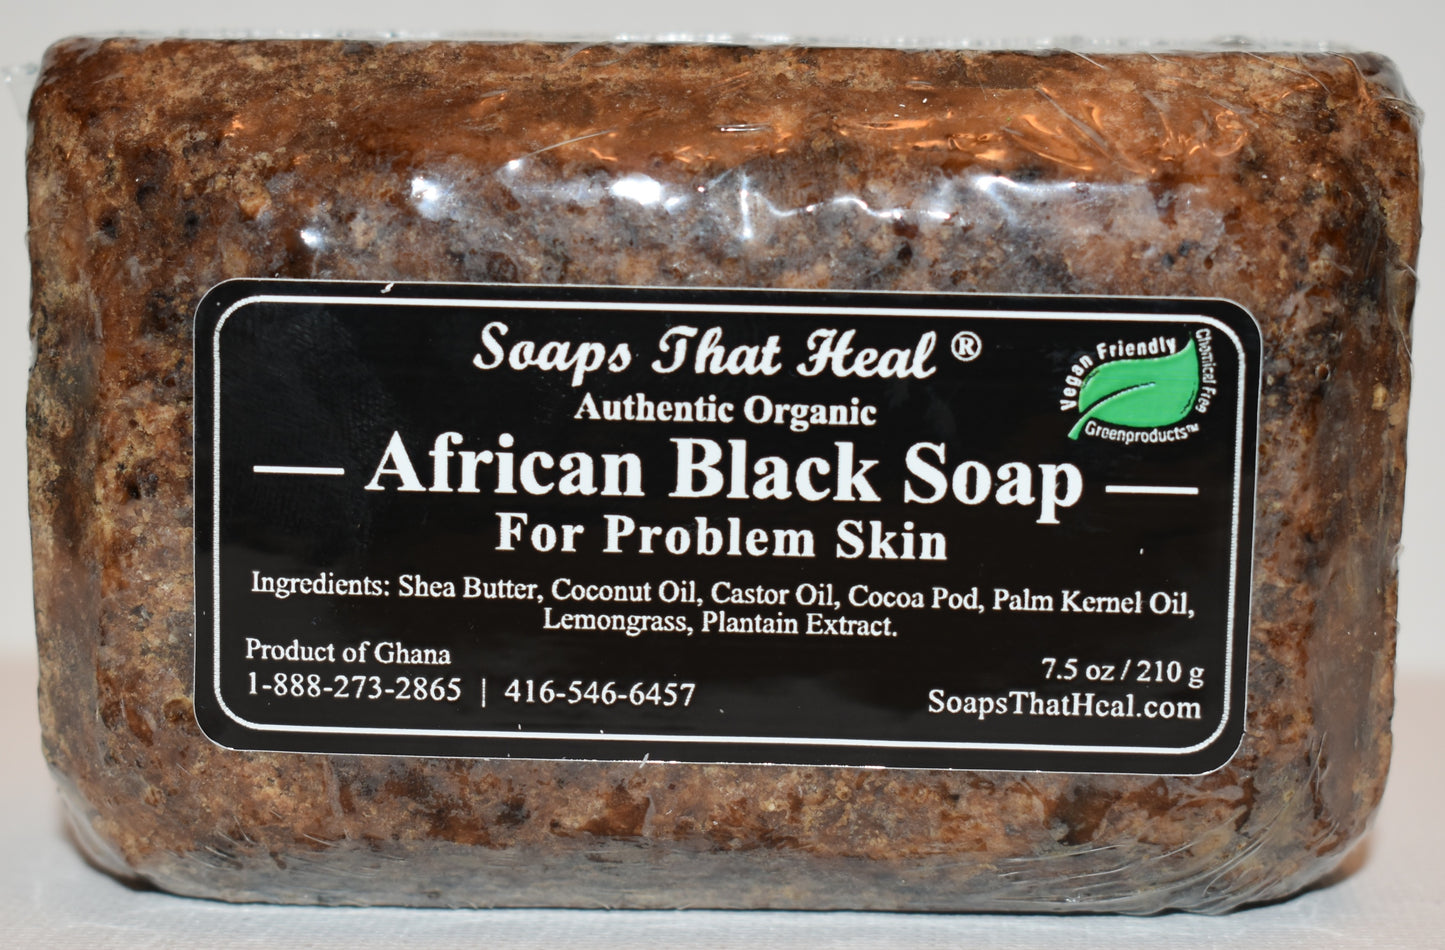 soaps that heal african black soap ghana shea butter plantain extract hyperpigmentation deep cleansing plantain extract,african black soap to remove dark marks, black soap for hyperpigmentation,african black soap benefits,how to use african black soap,raw black soap,black soap for face,acne afrian black soap,Facial Acanthosis Nigricans,asymptomatic, velvety hyperpigmentation